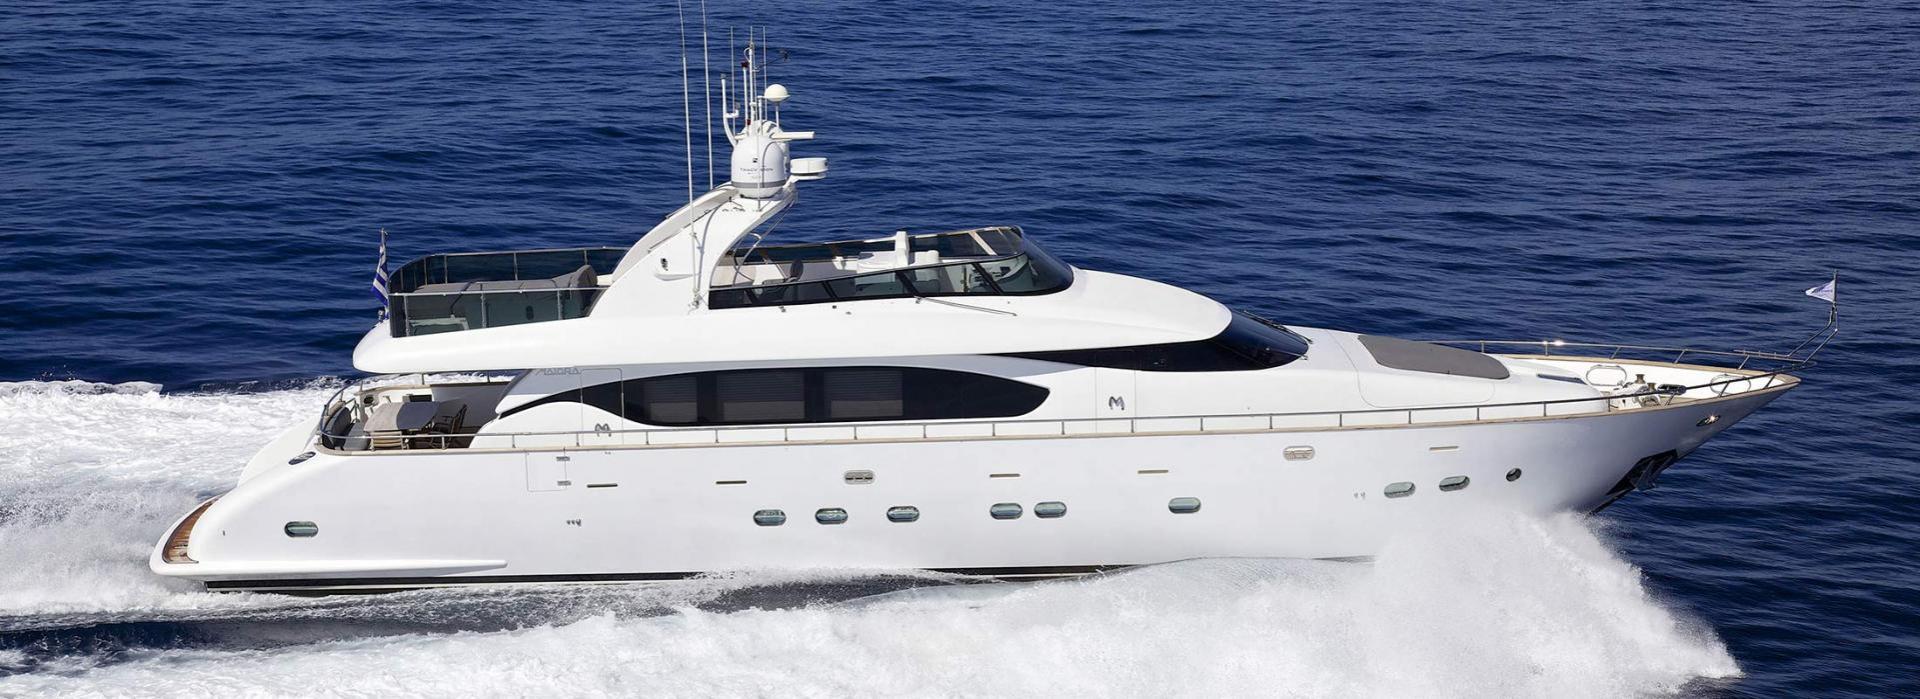 Athens Gold Yachting - Cudu overview